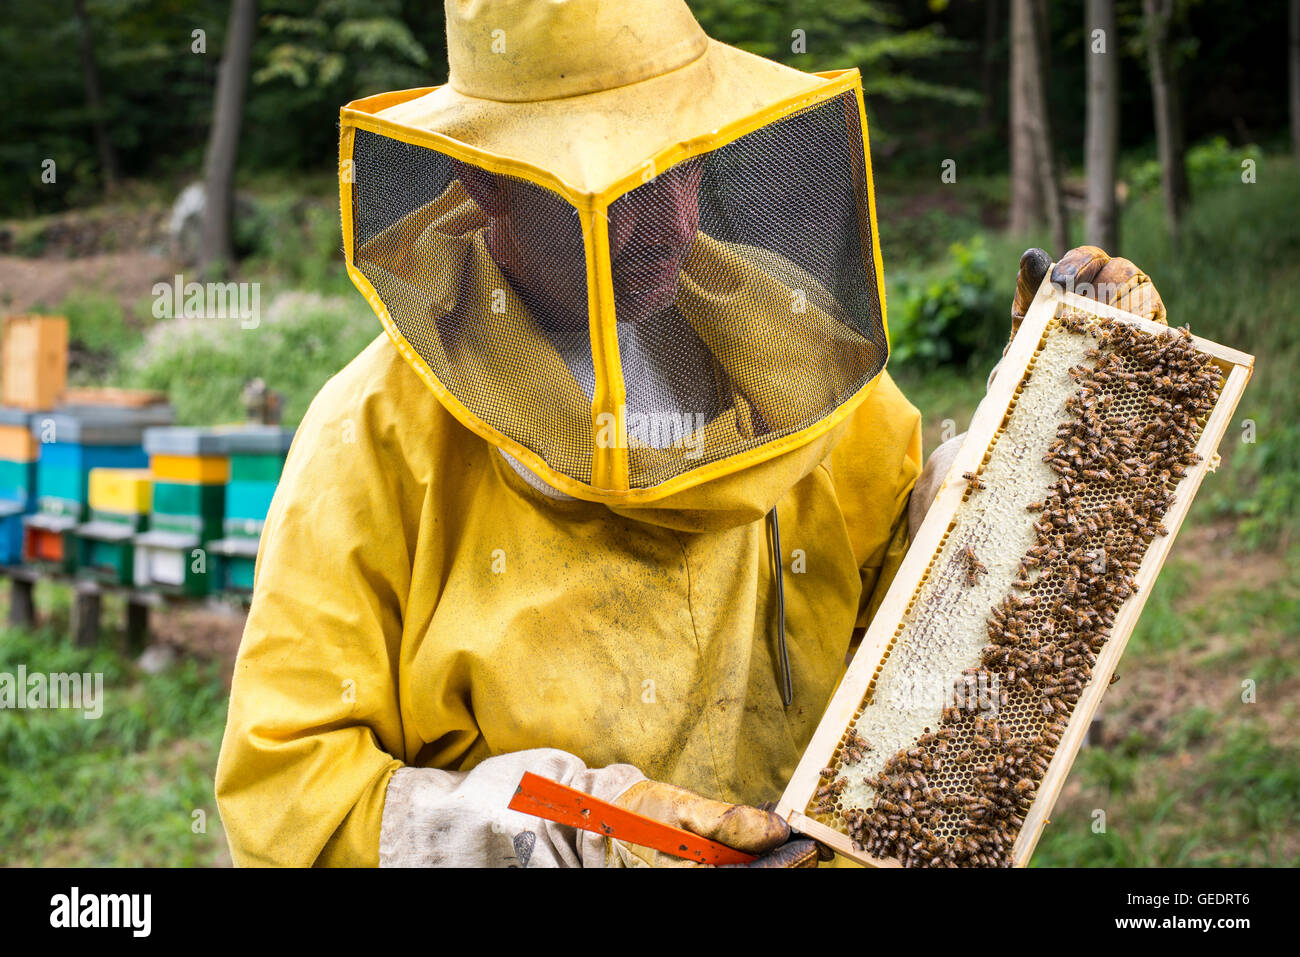 Beekeeper Holding Honeycomb of Bees Stock Photo